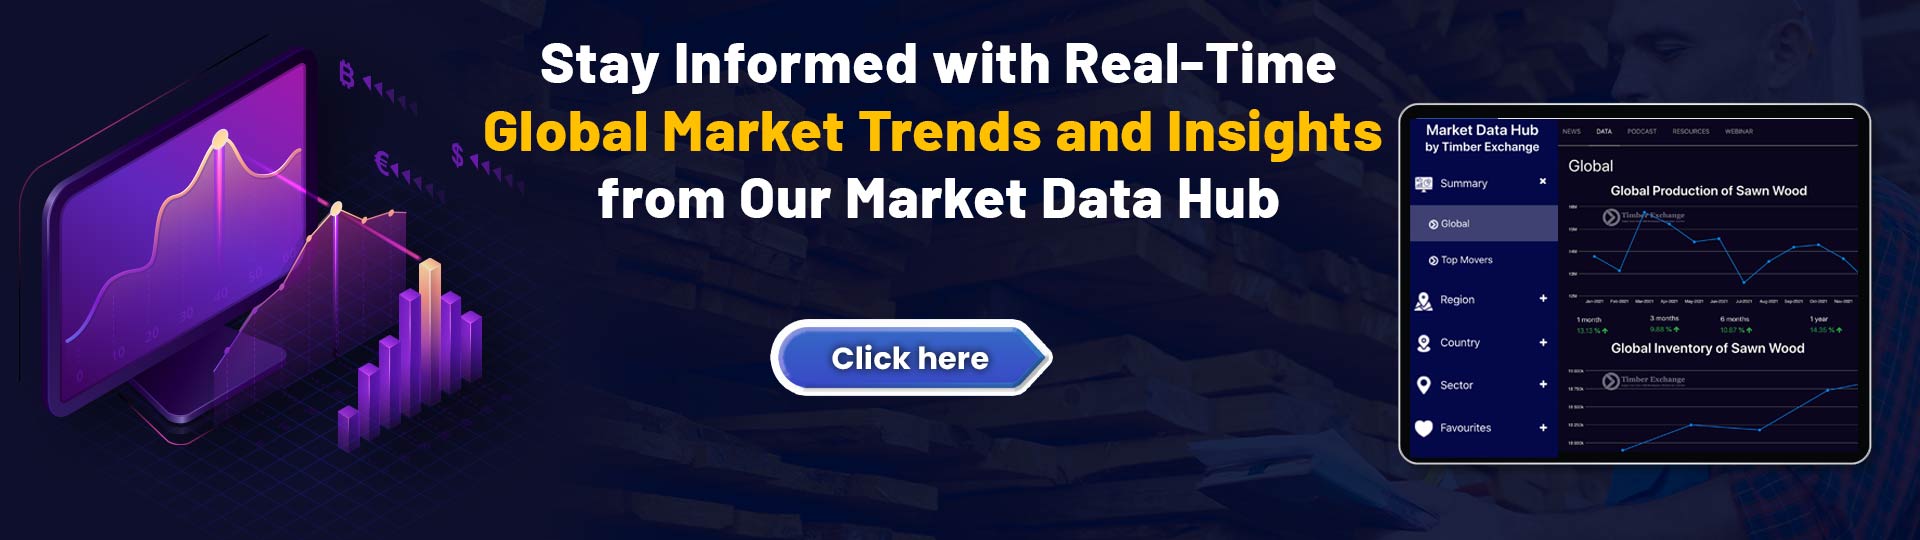 Stay Informed with Real-Time Global Market Insights from Our Market Data Hub